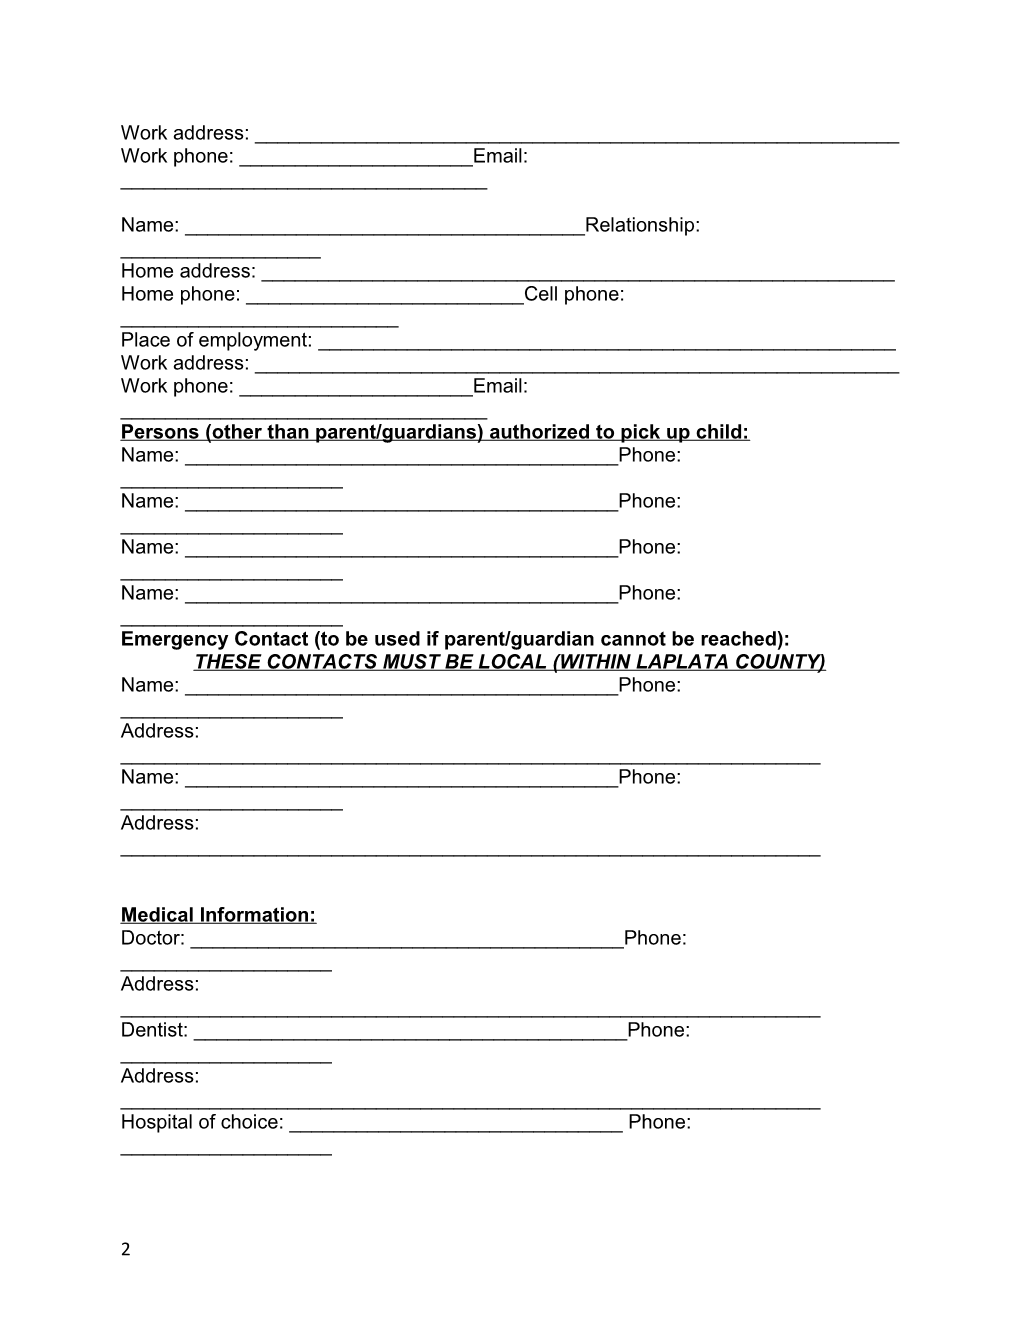 Please Turn This Form in to Your School Kids Camp